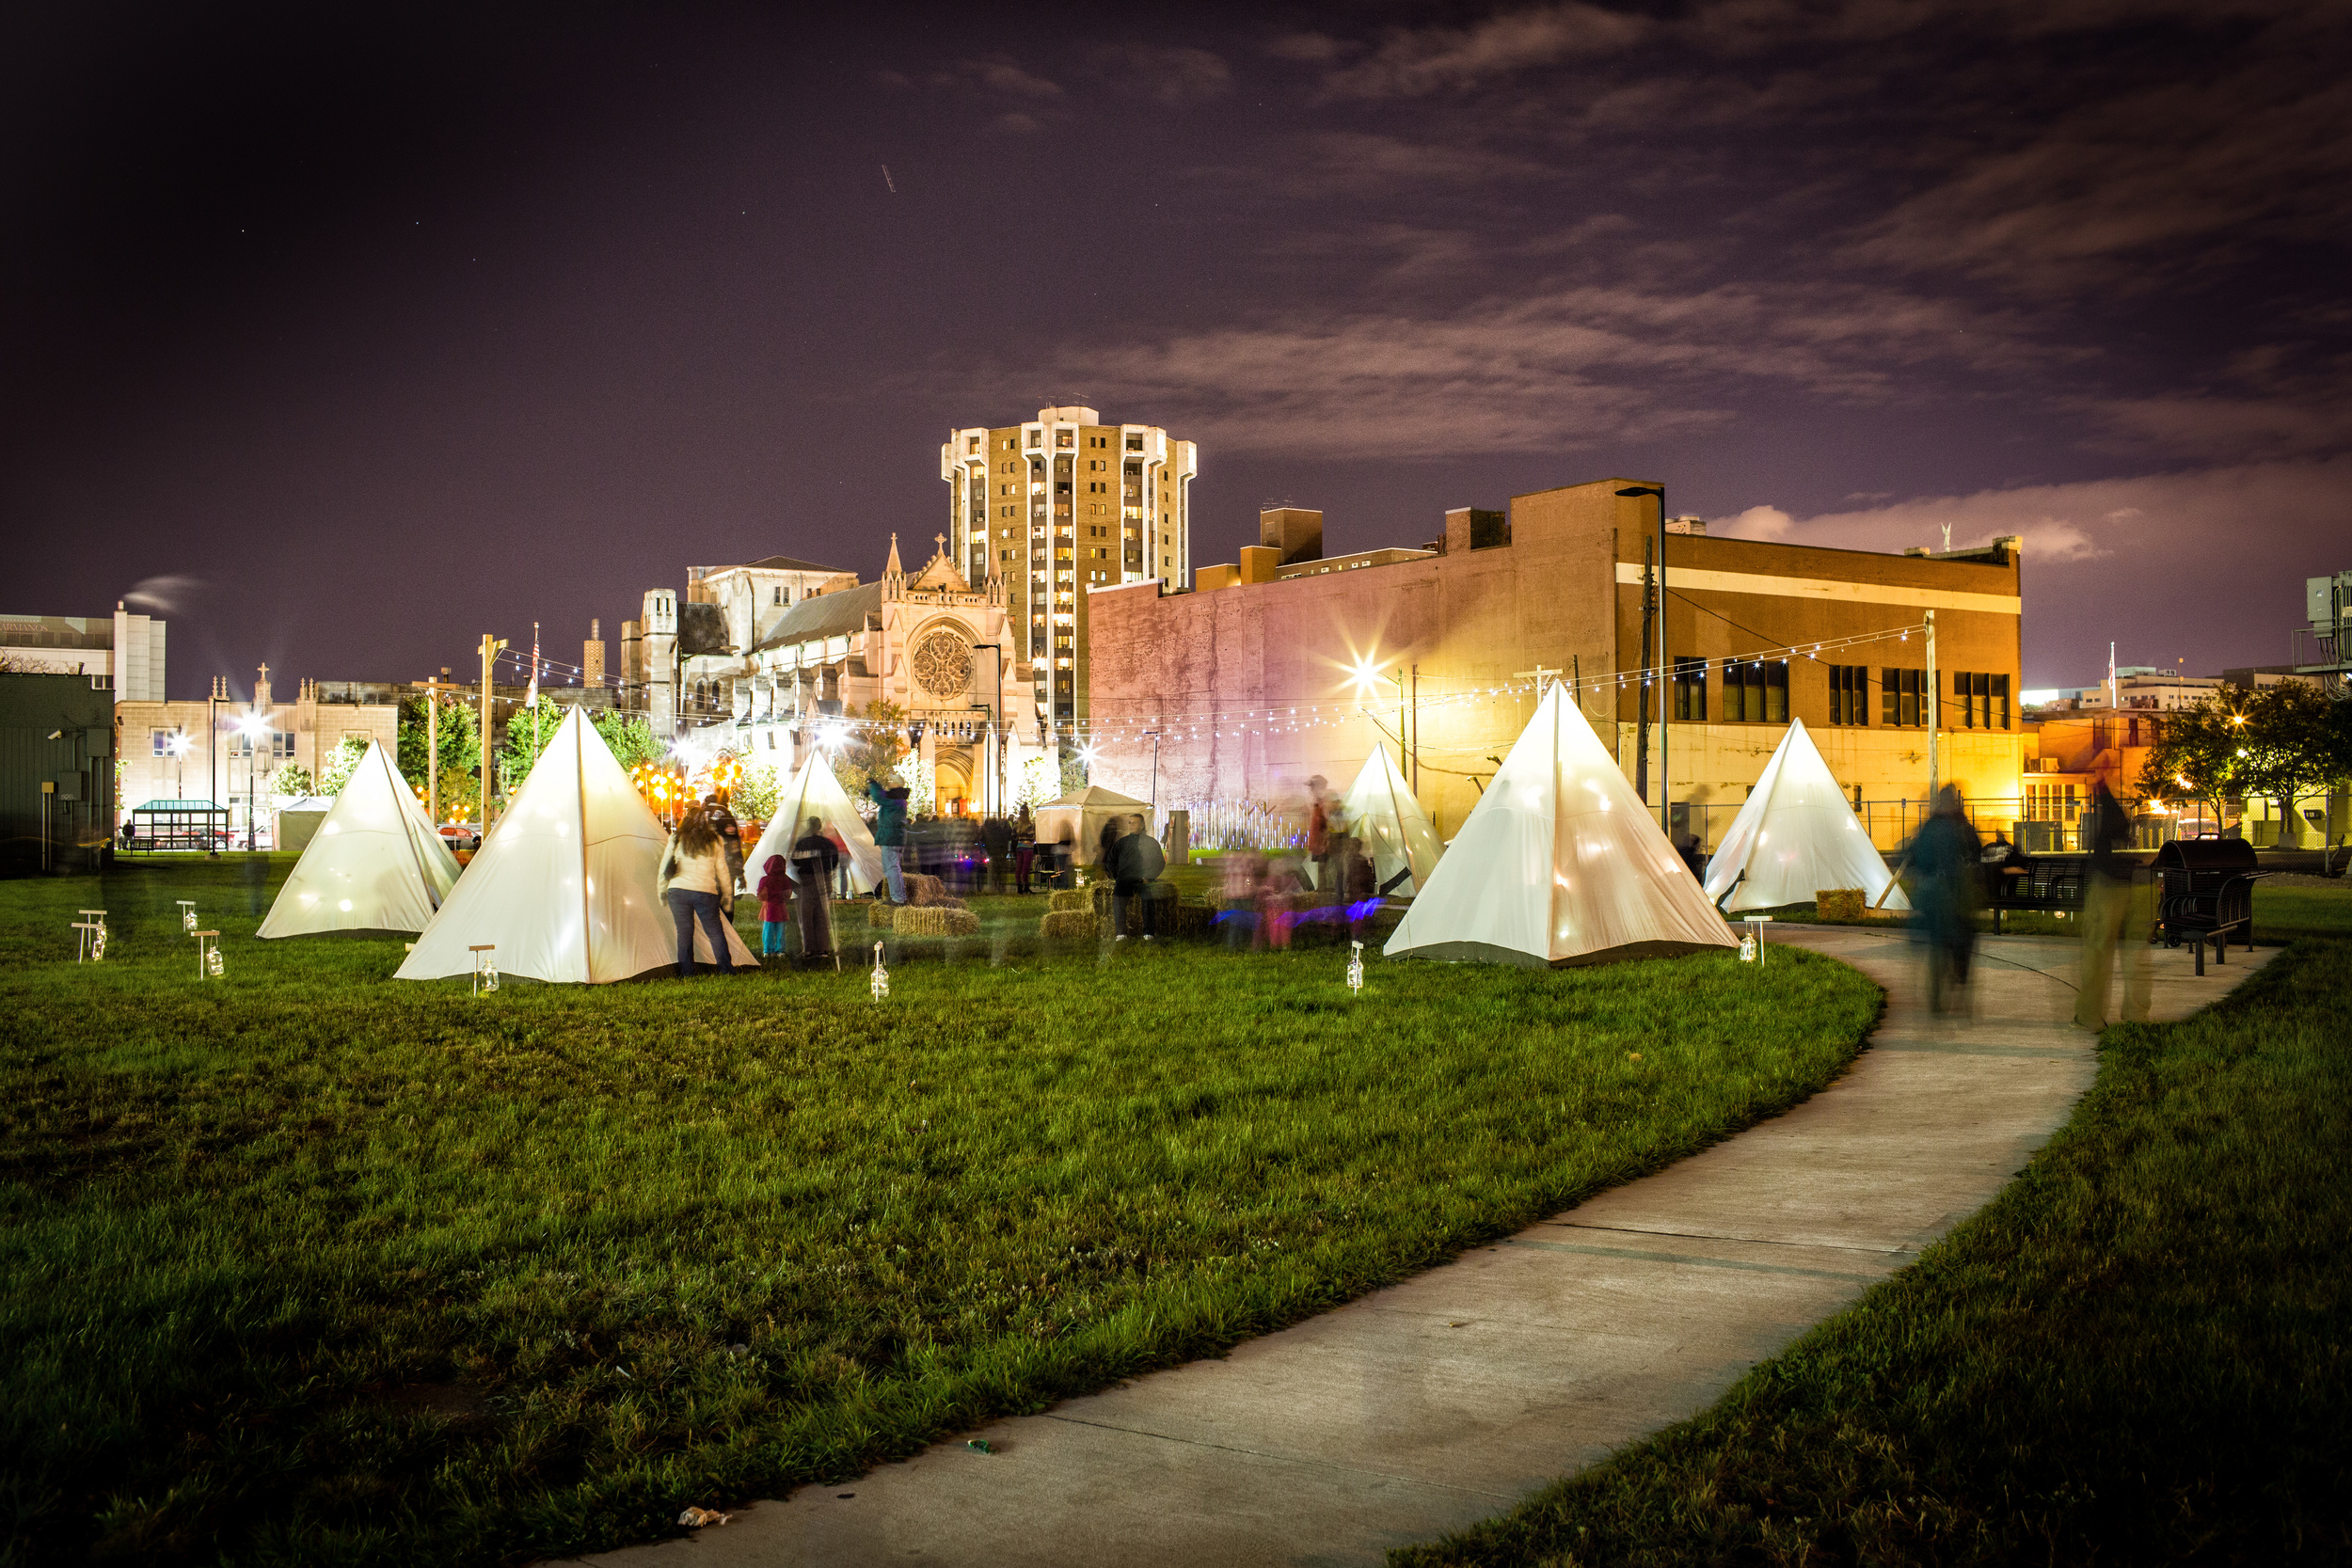  Dlectricity Frontier Town: A Tent Camp for Children in the Urban Wild 